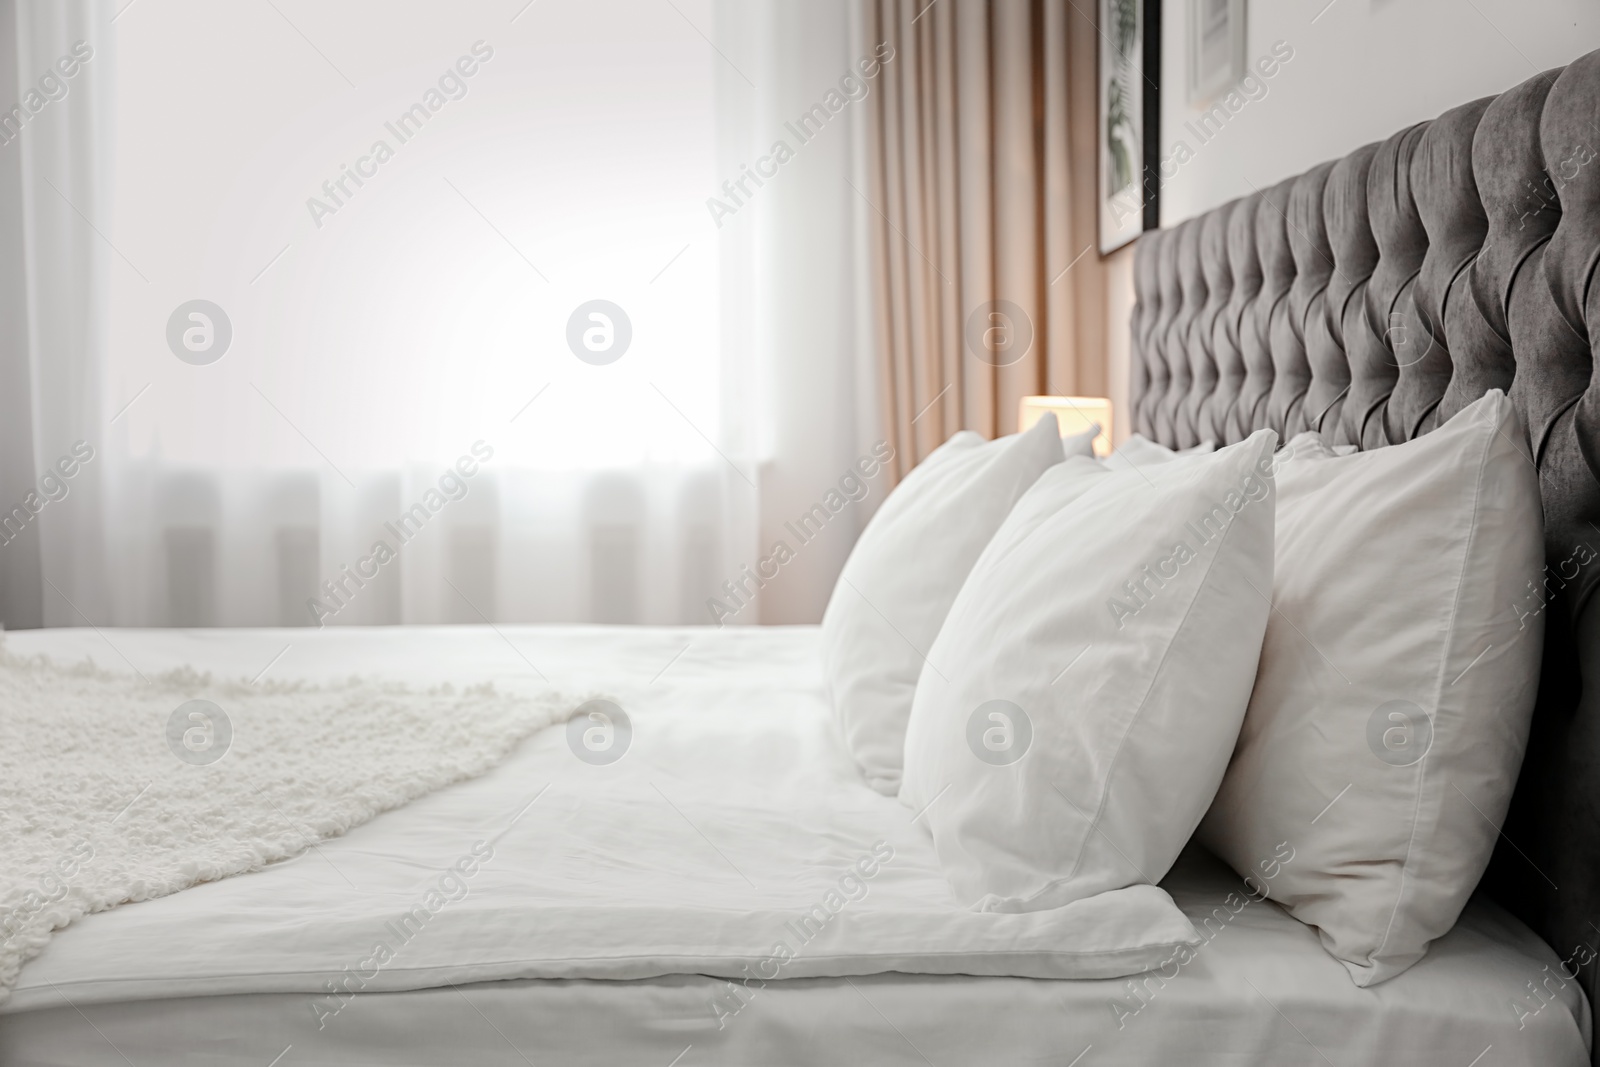 Photo of Bed with pillows in hotel room